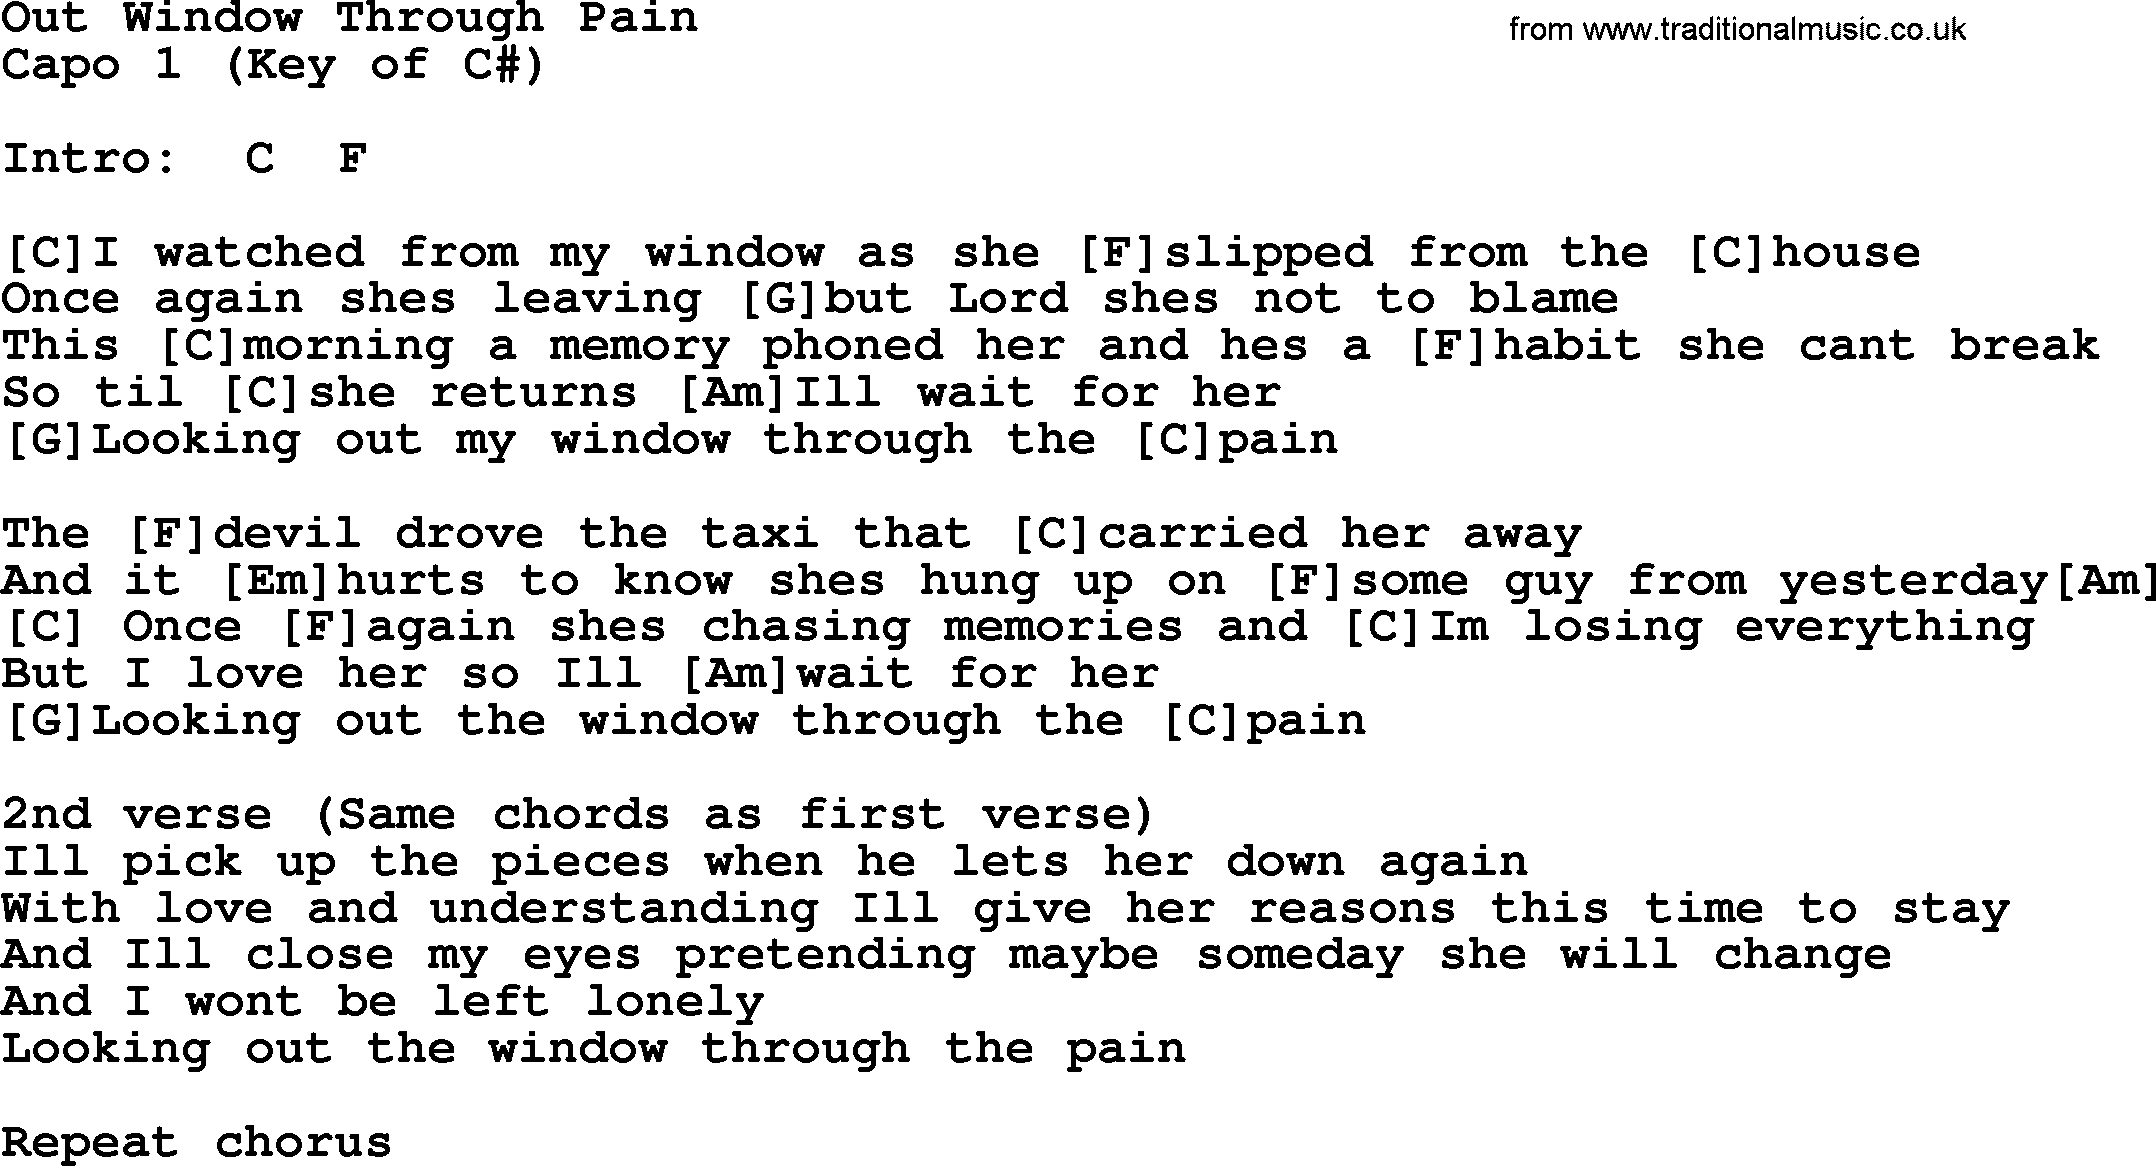 George Strait song: Out Window Through Pain, lyrics and chords